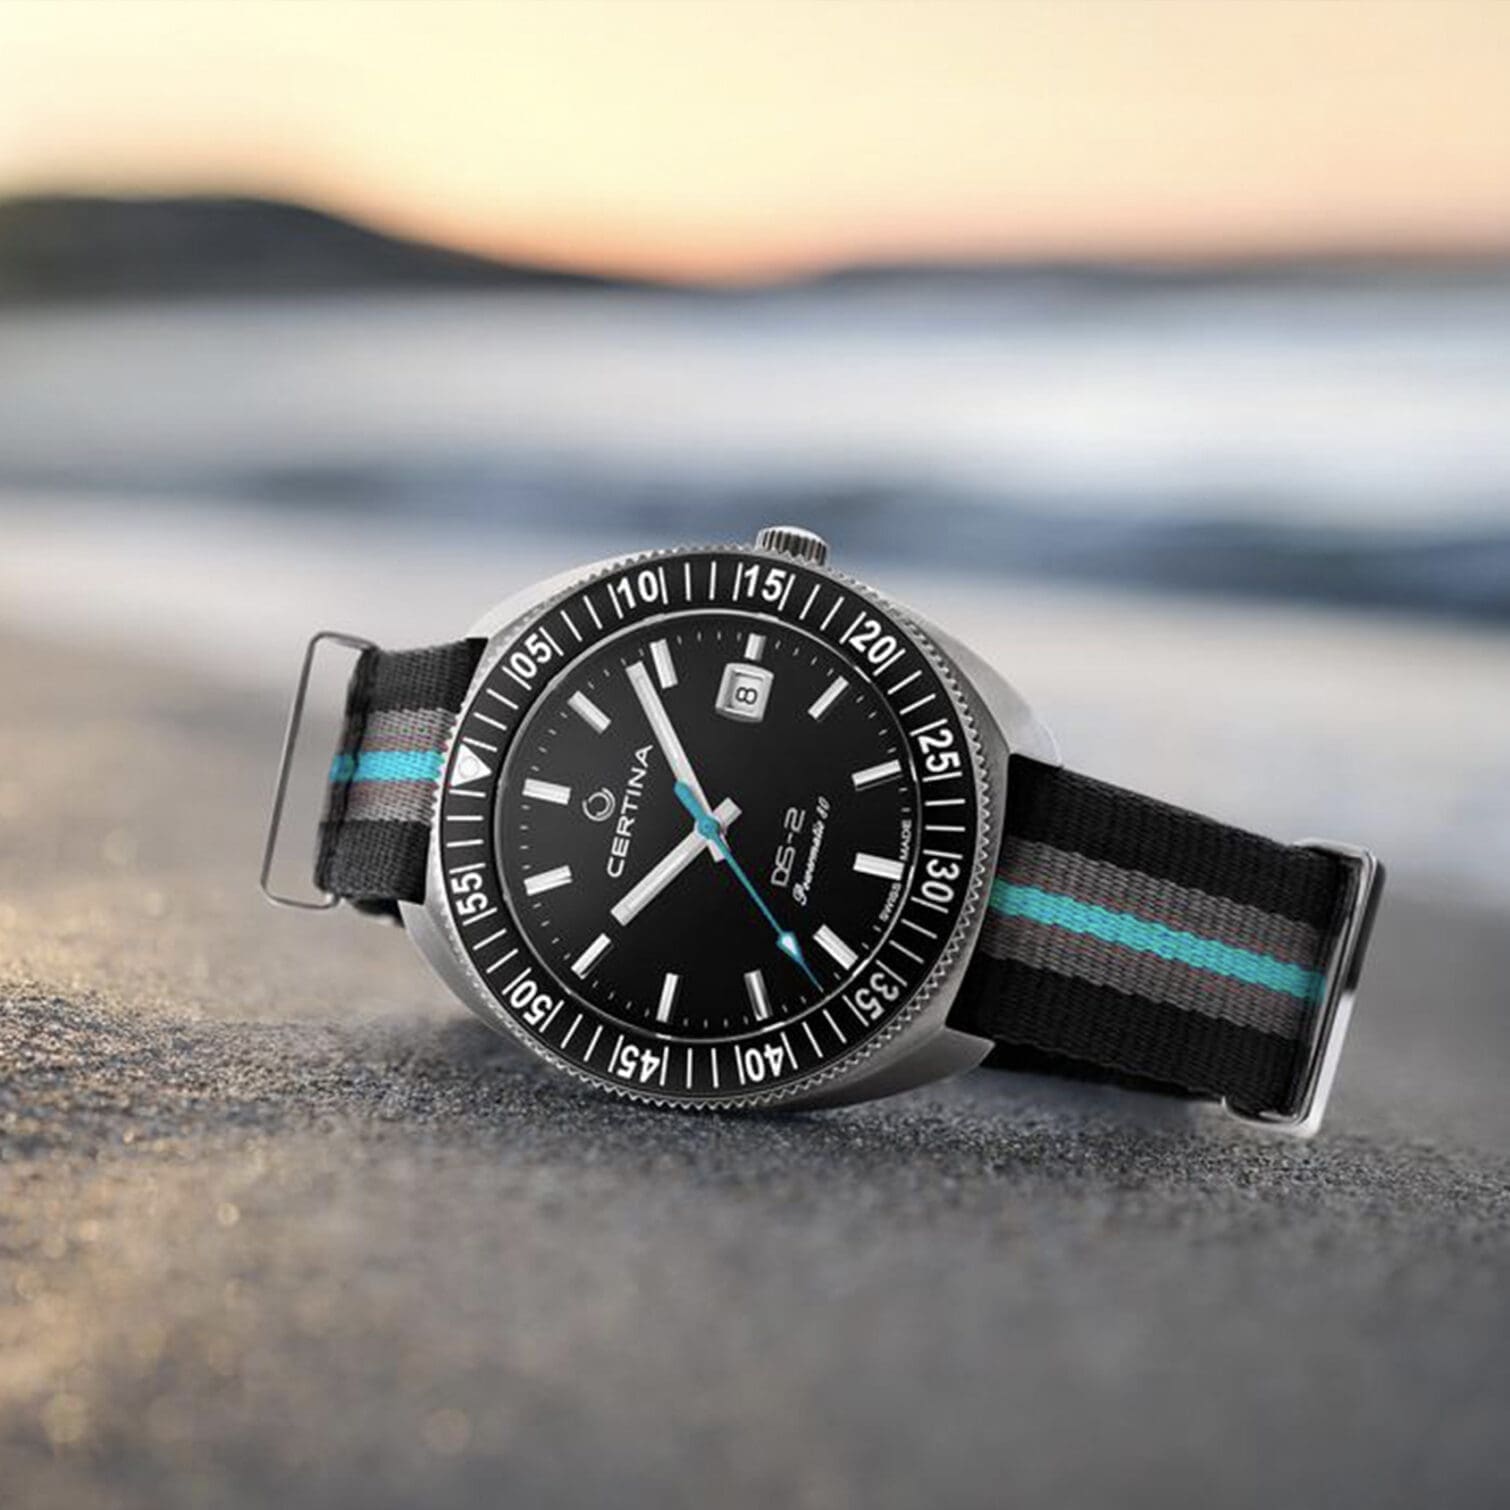 INTRODUCING: The Certina DS-2 Turning Bezel is a cushion-cased diver with a touch of retro flair